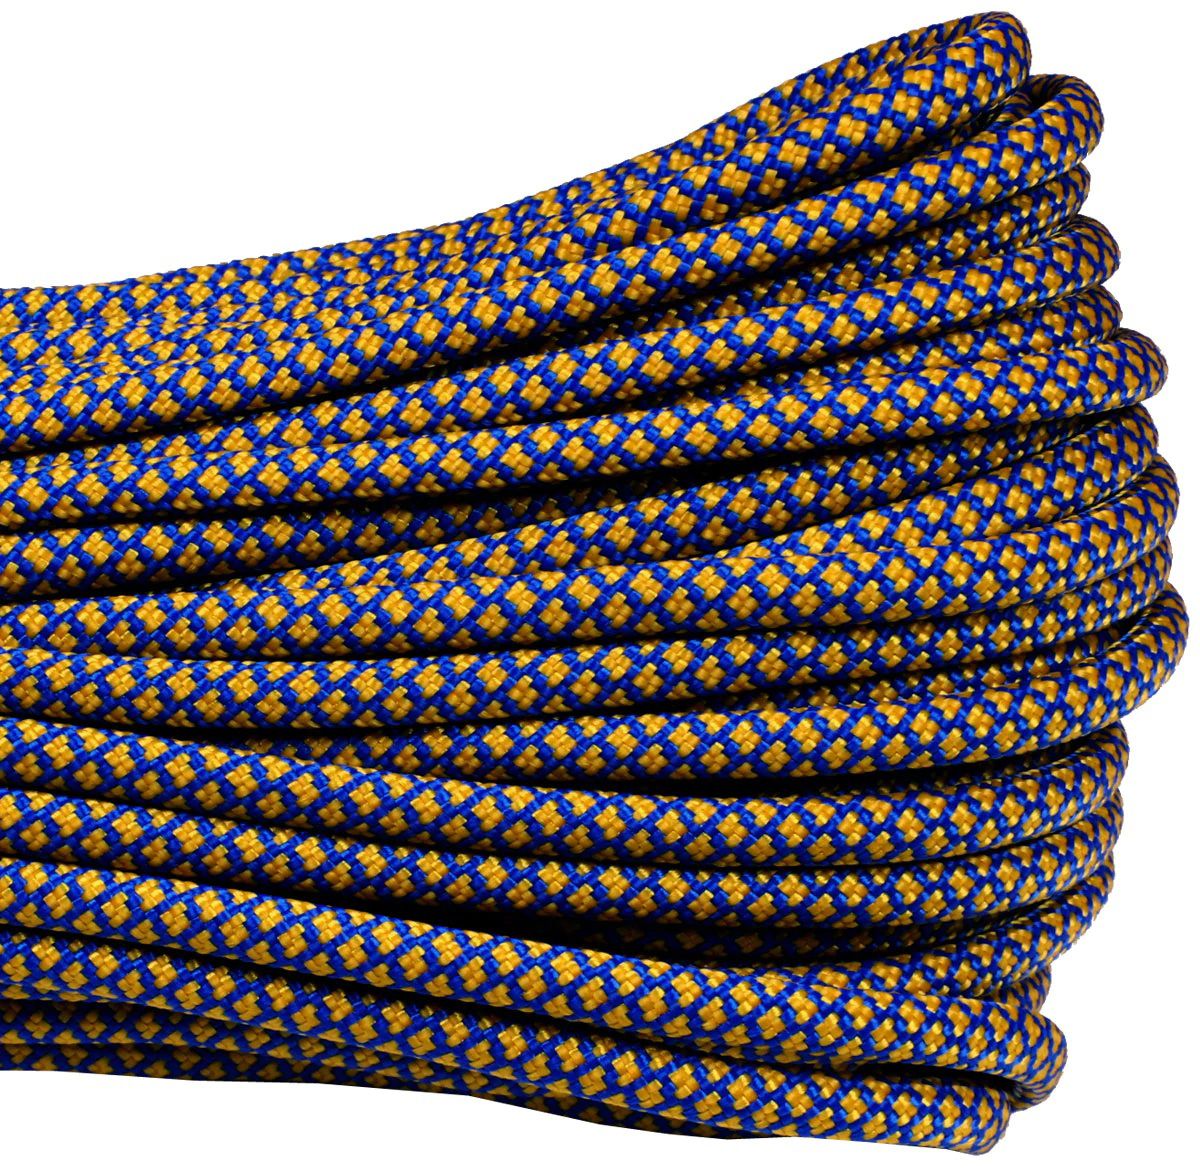 Atwood Rope 550 Paracord, Blue/Gold Royal Diamonds, 100 Feet